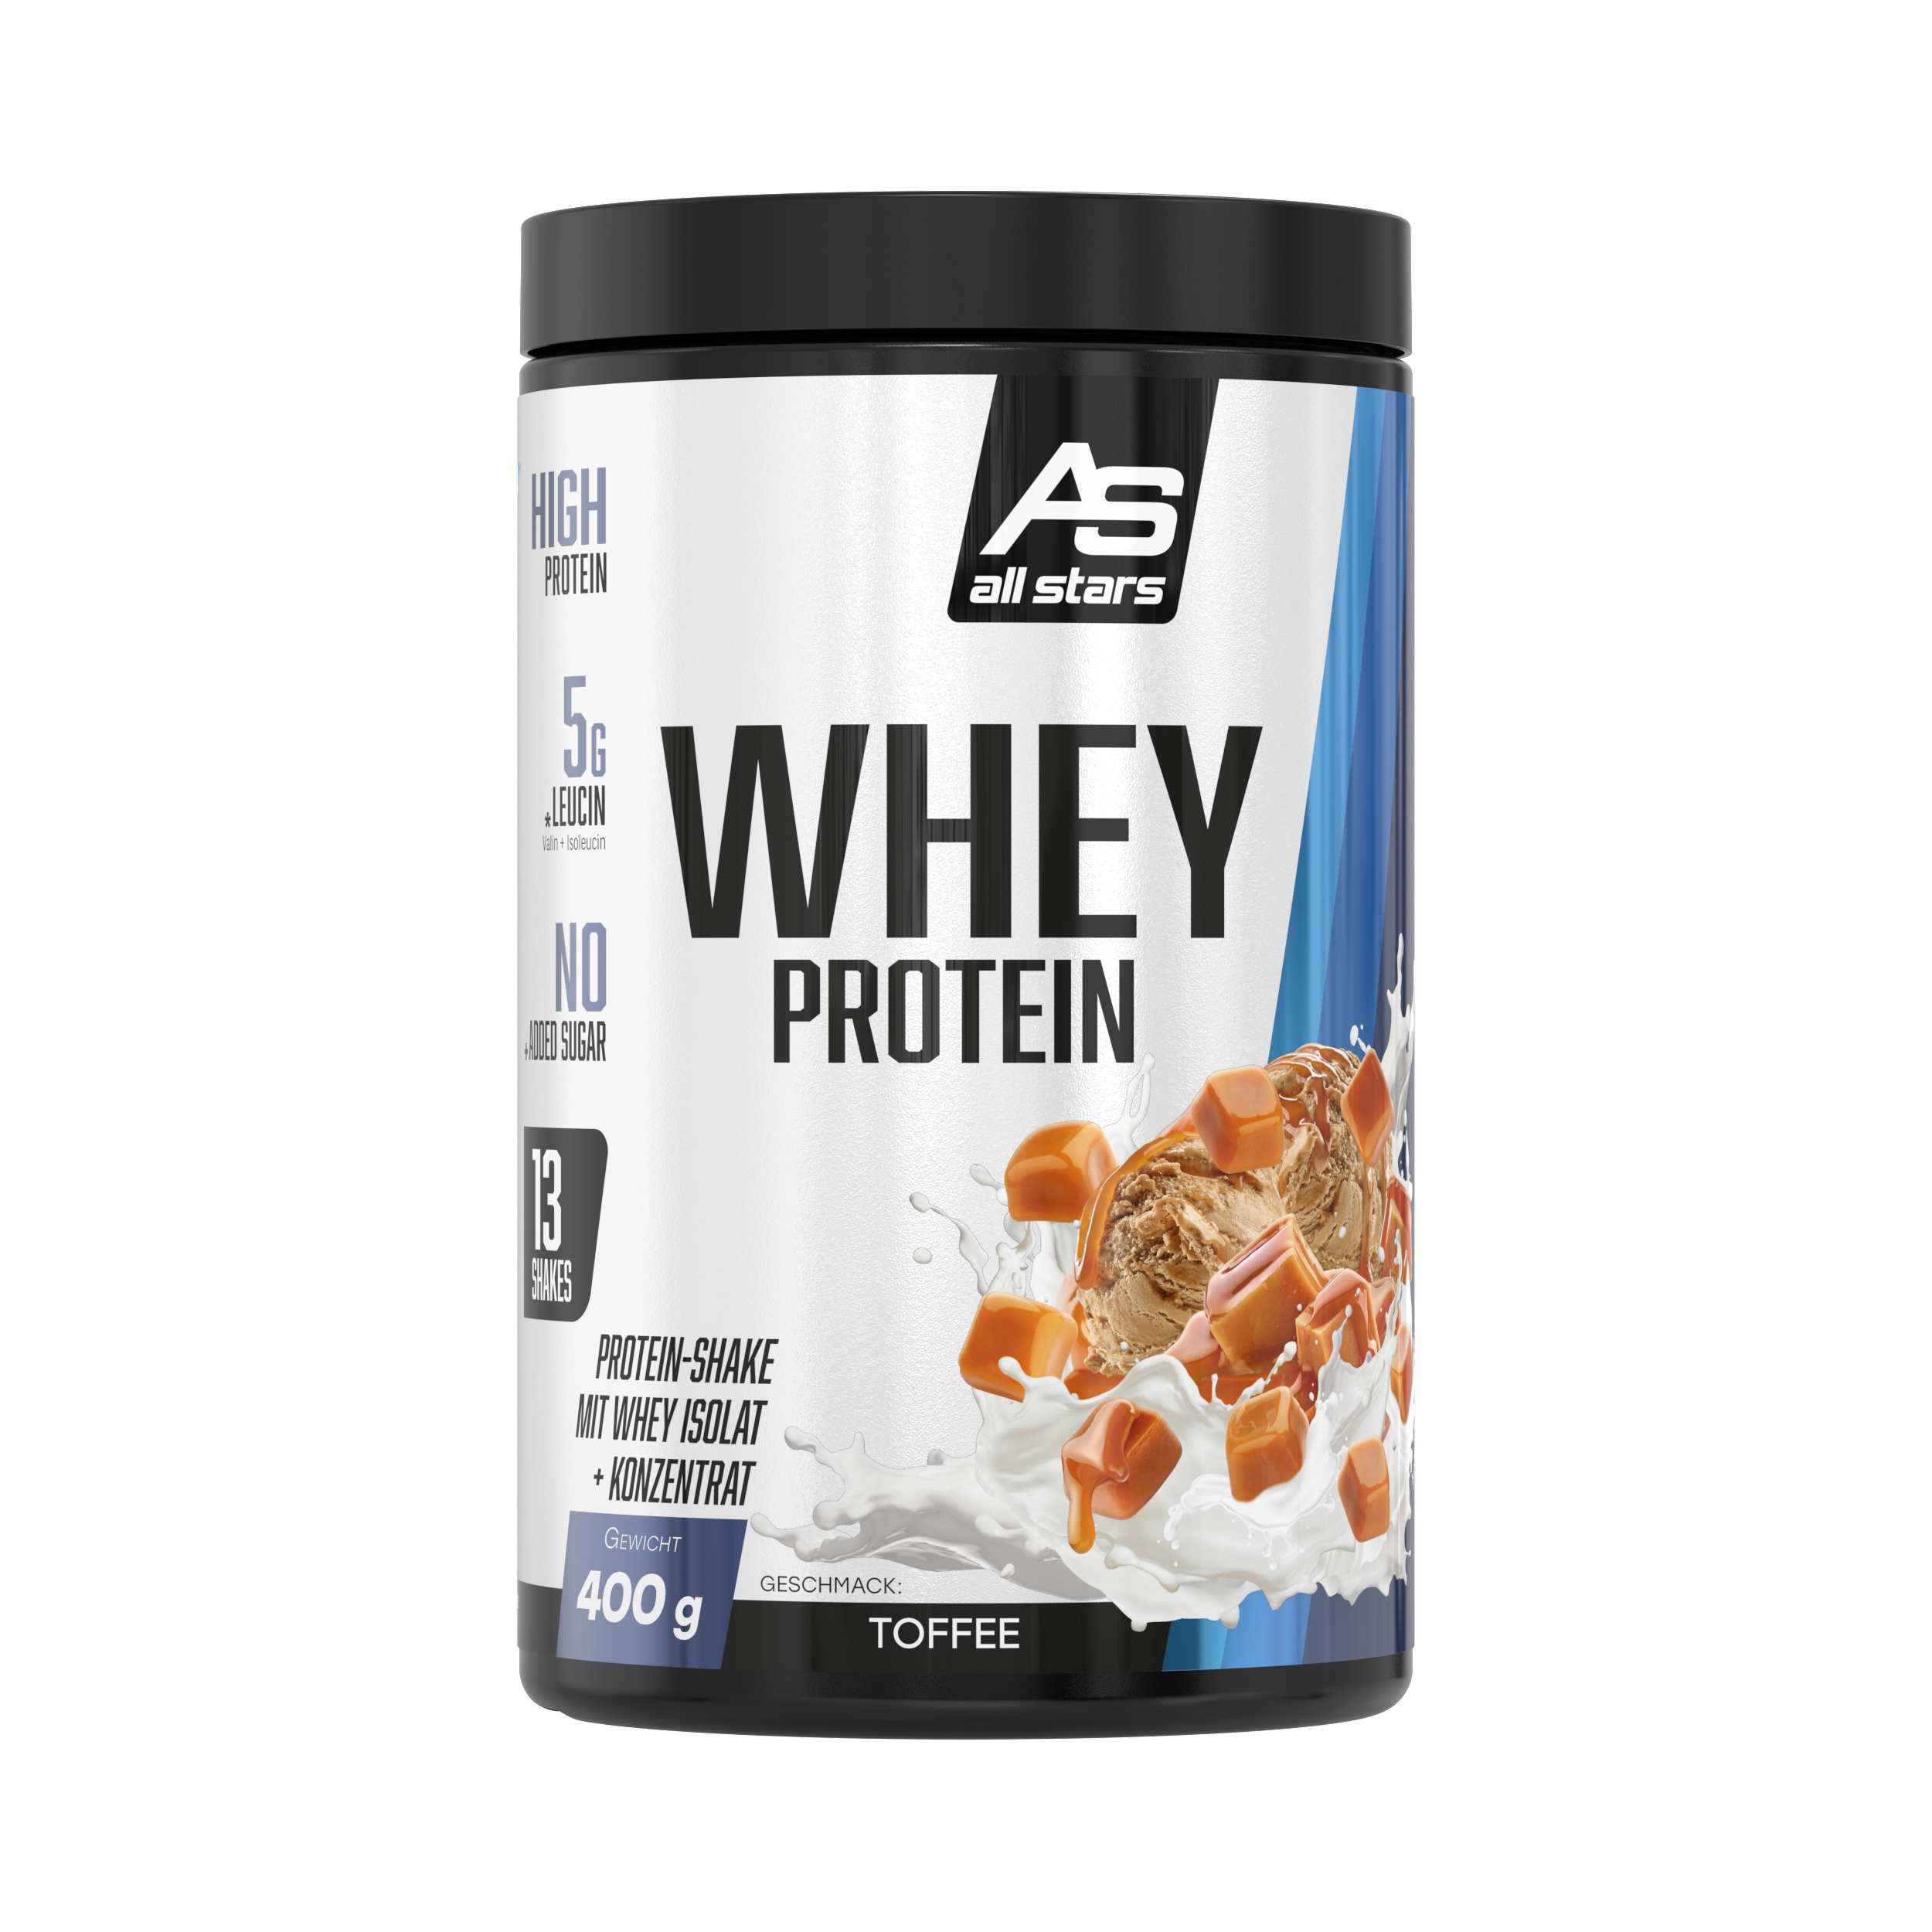 ALL STARS Whey Protein - 400g Dose